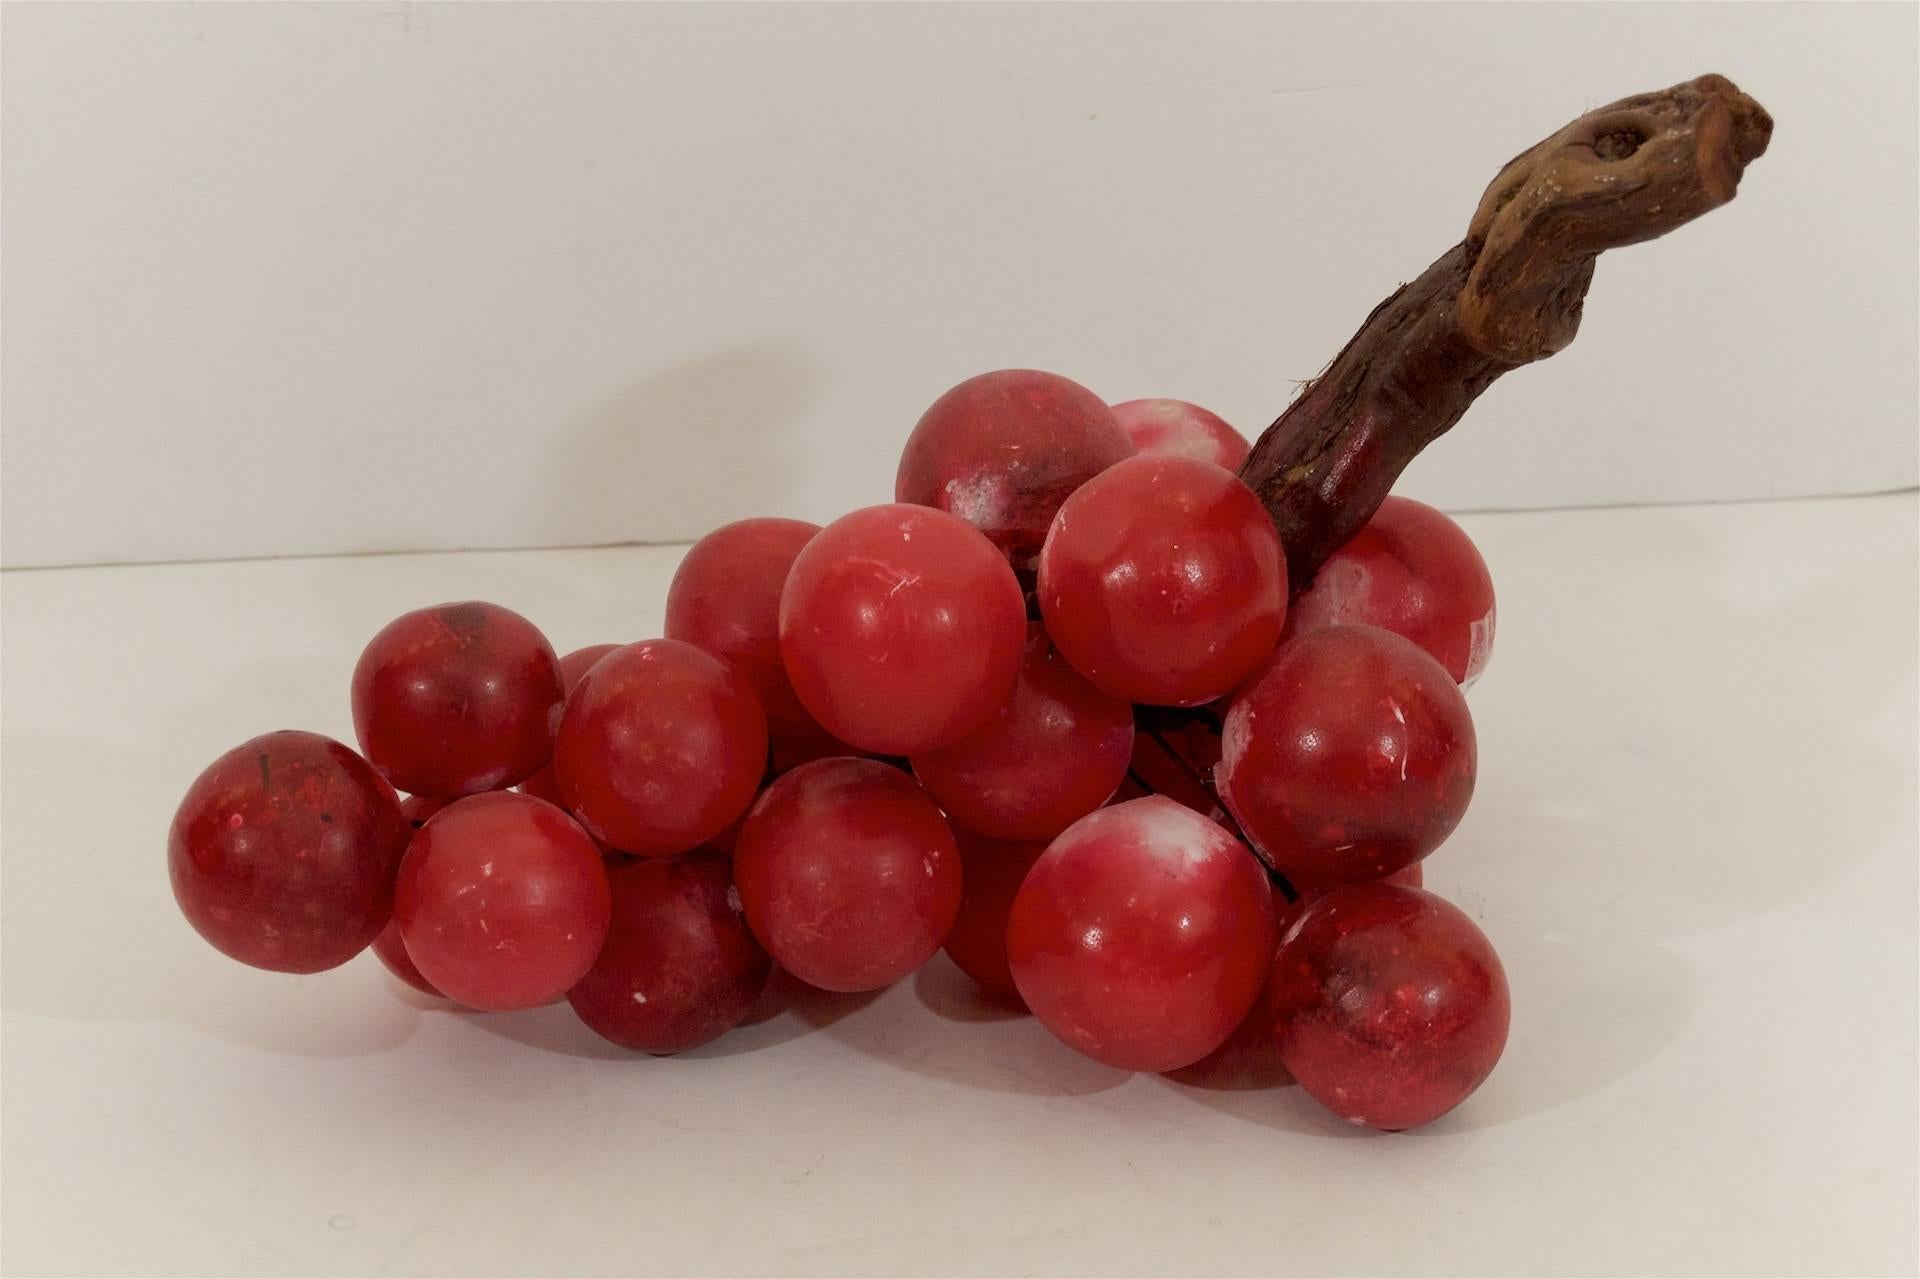 Mid-Century Modern grapes in a unique cream hue. Hard to find large size and coloration with wooden stem. A perfect centerpiece.

Dimensions are approximate.